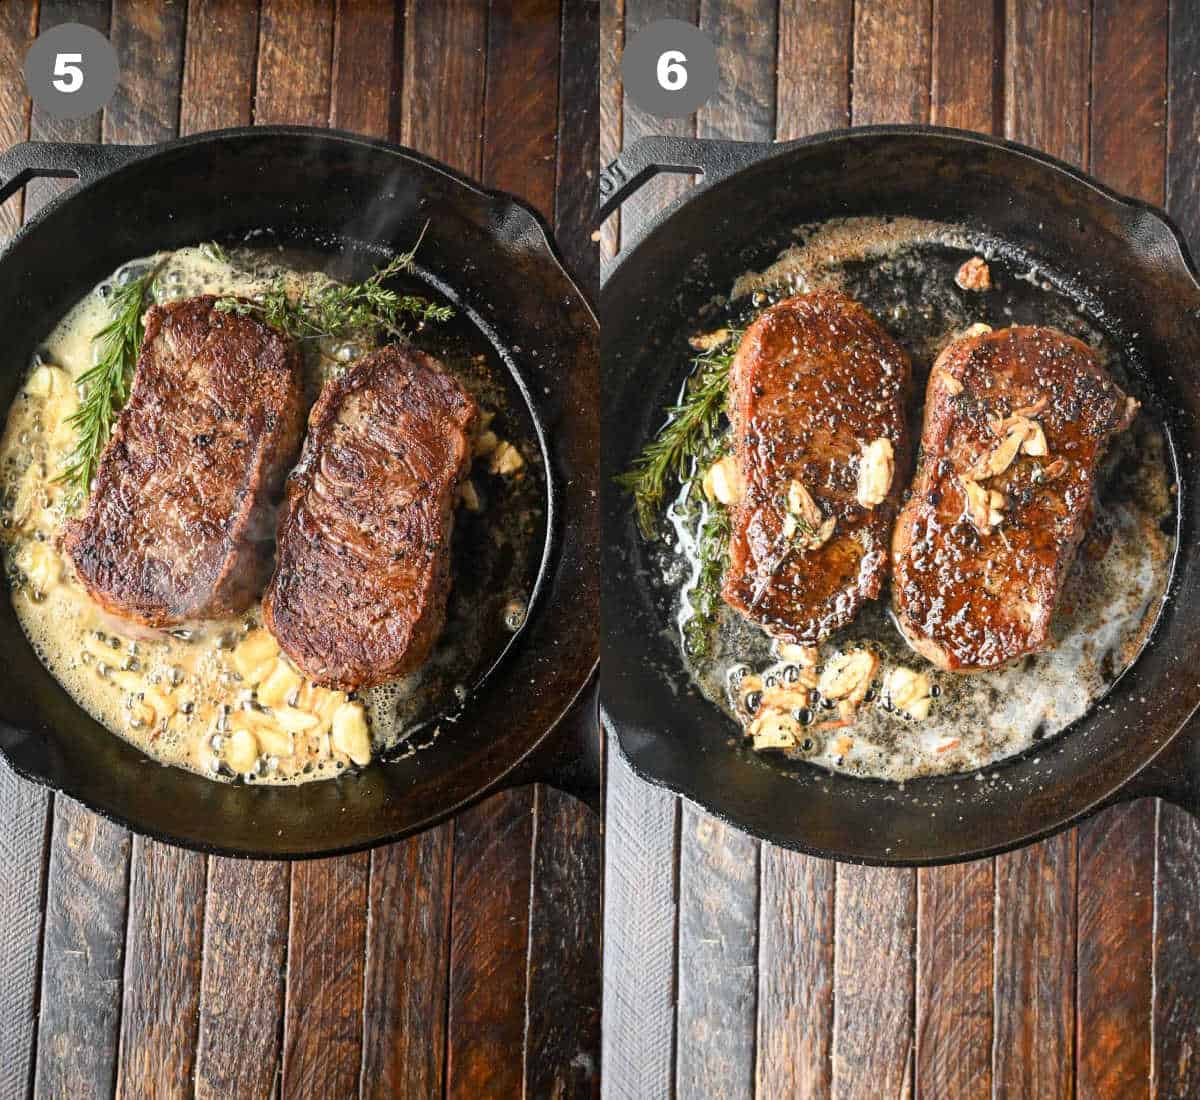 Rib eye steaks cooked in a skillet with garlic butter.